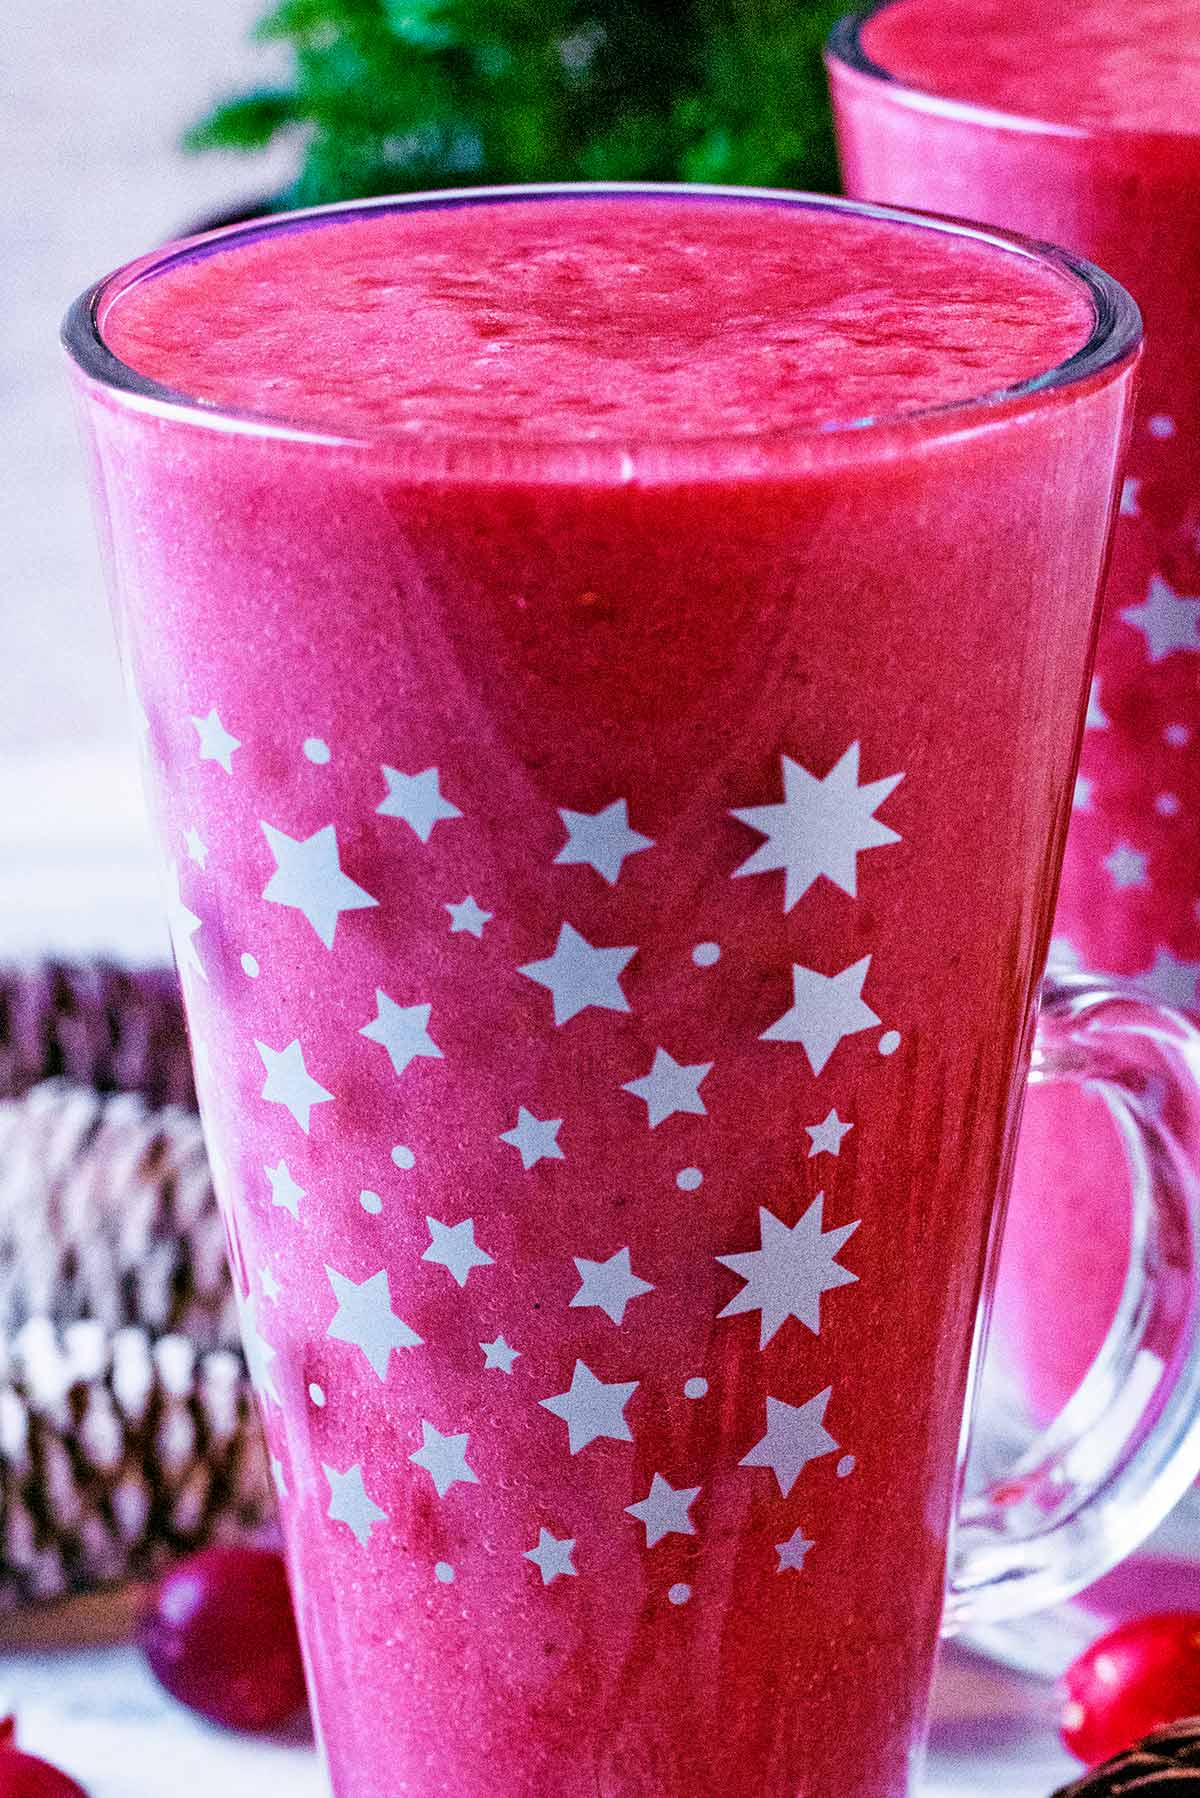 A tall glass decorated with stars containing cranberry smoothie.